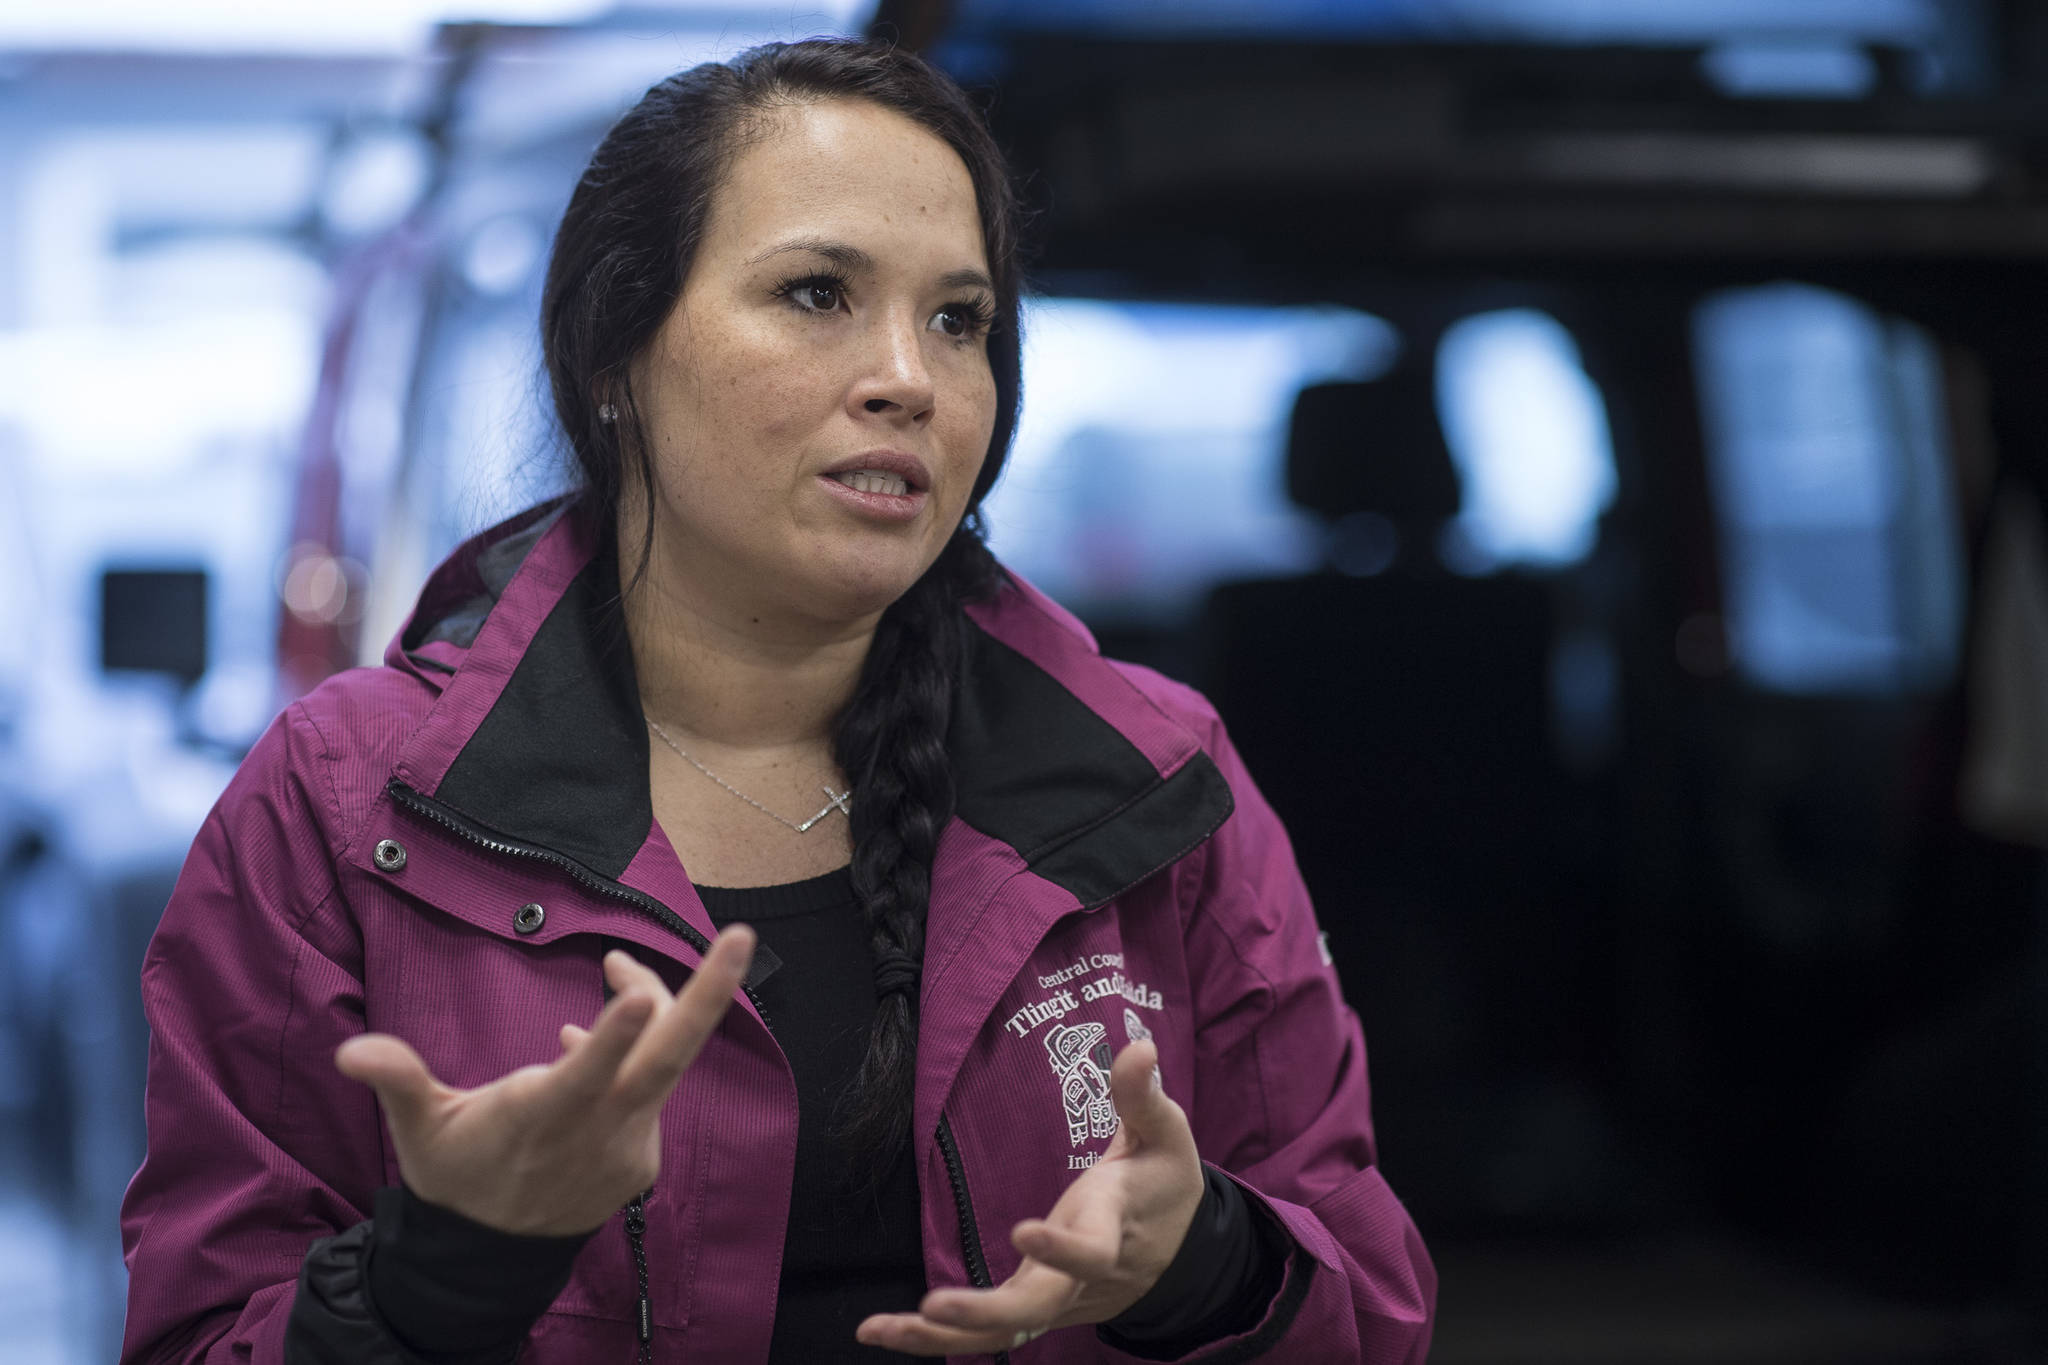 Emily Edenshaw, Business and Economic Development Director for the Central Council of the Tlingit and Haida Indian Tribes of Alaska, speaks about the council’s wishes to create jobs for their members during an interview at their newest business, Sacred Shine, on Friday, Dec. 21, 2018. (Michael Penn | Juneau Empire)